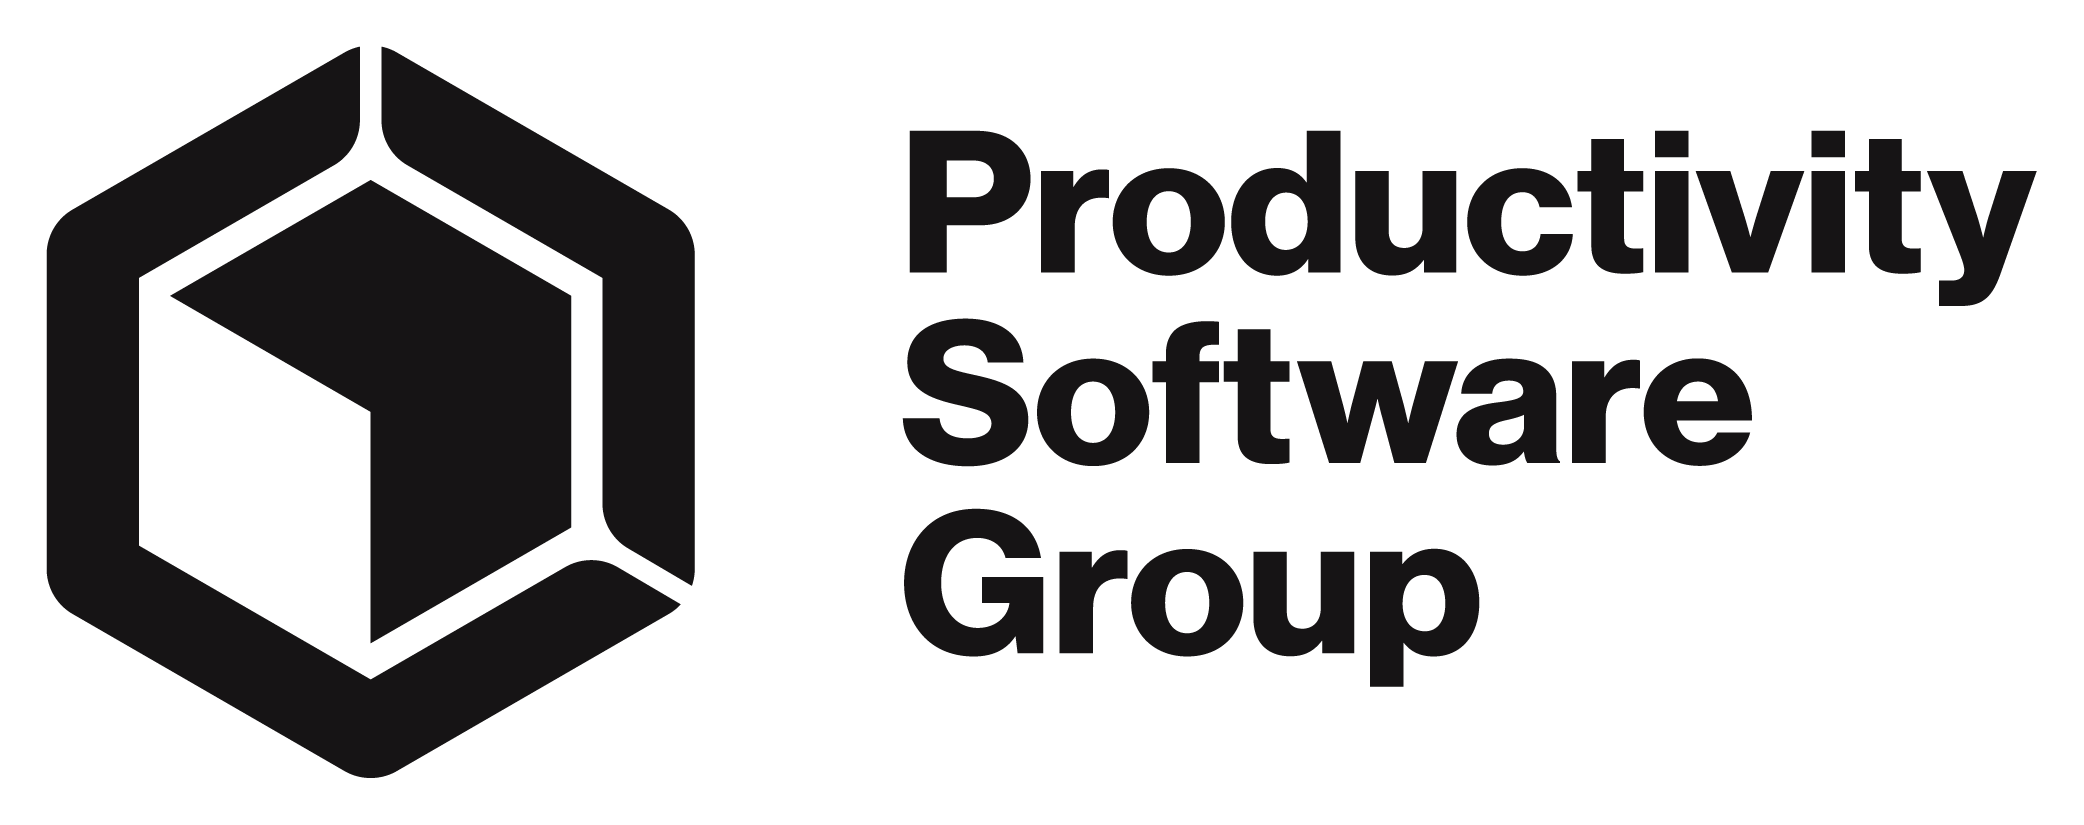 Productivity Software Group